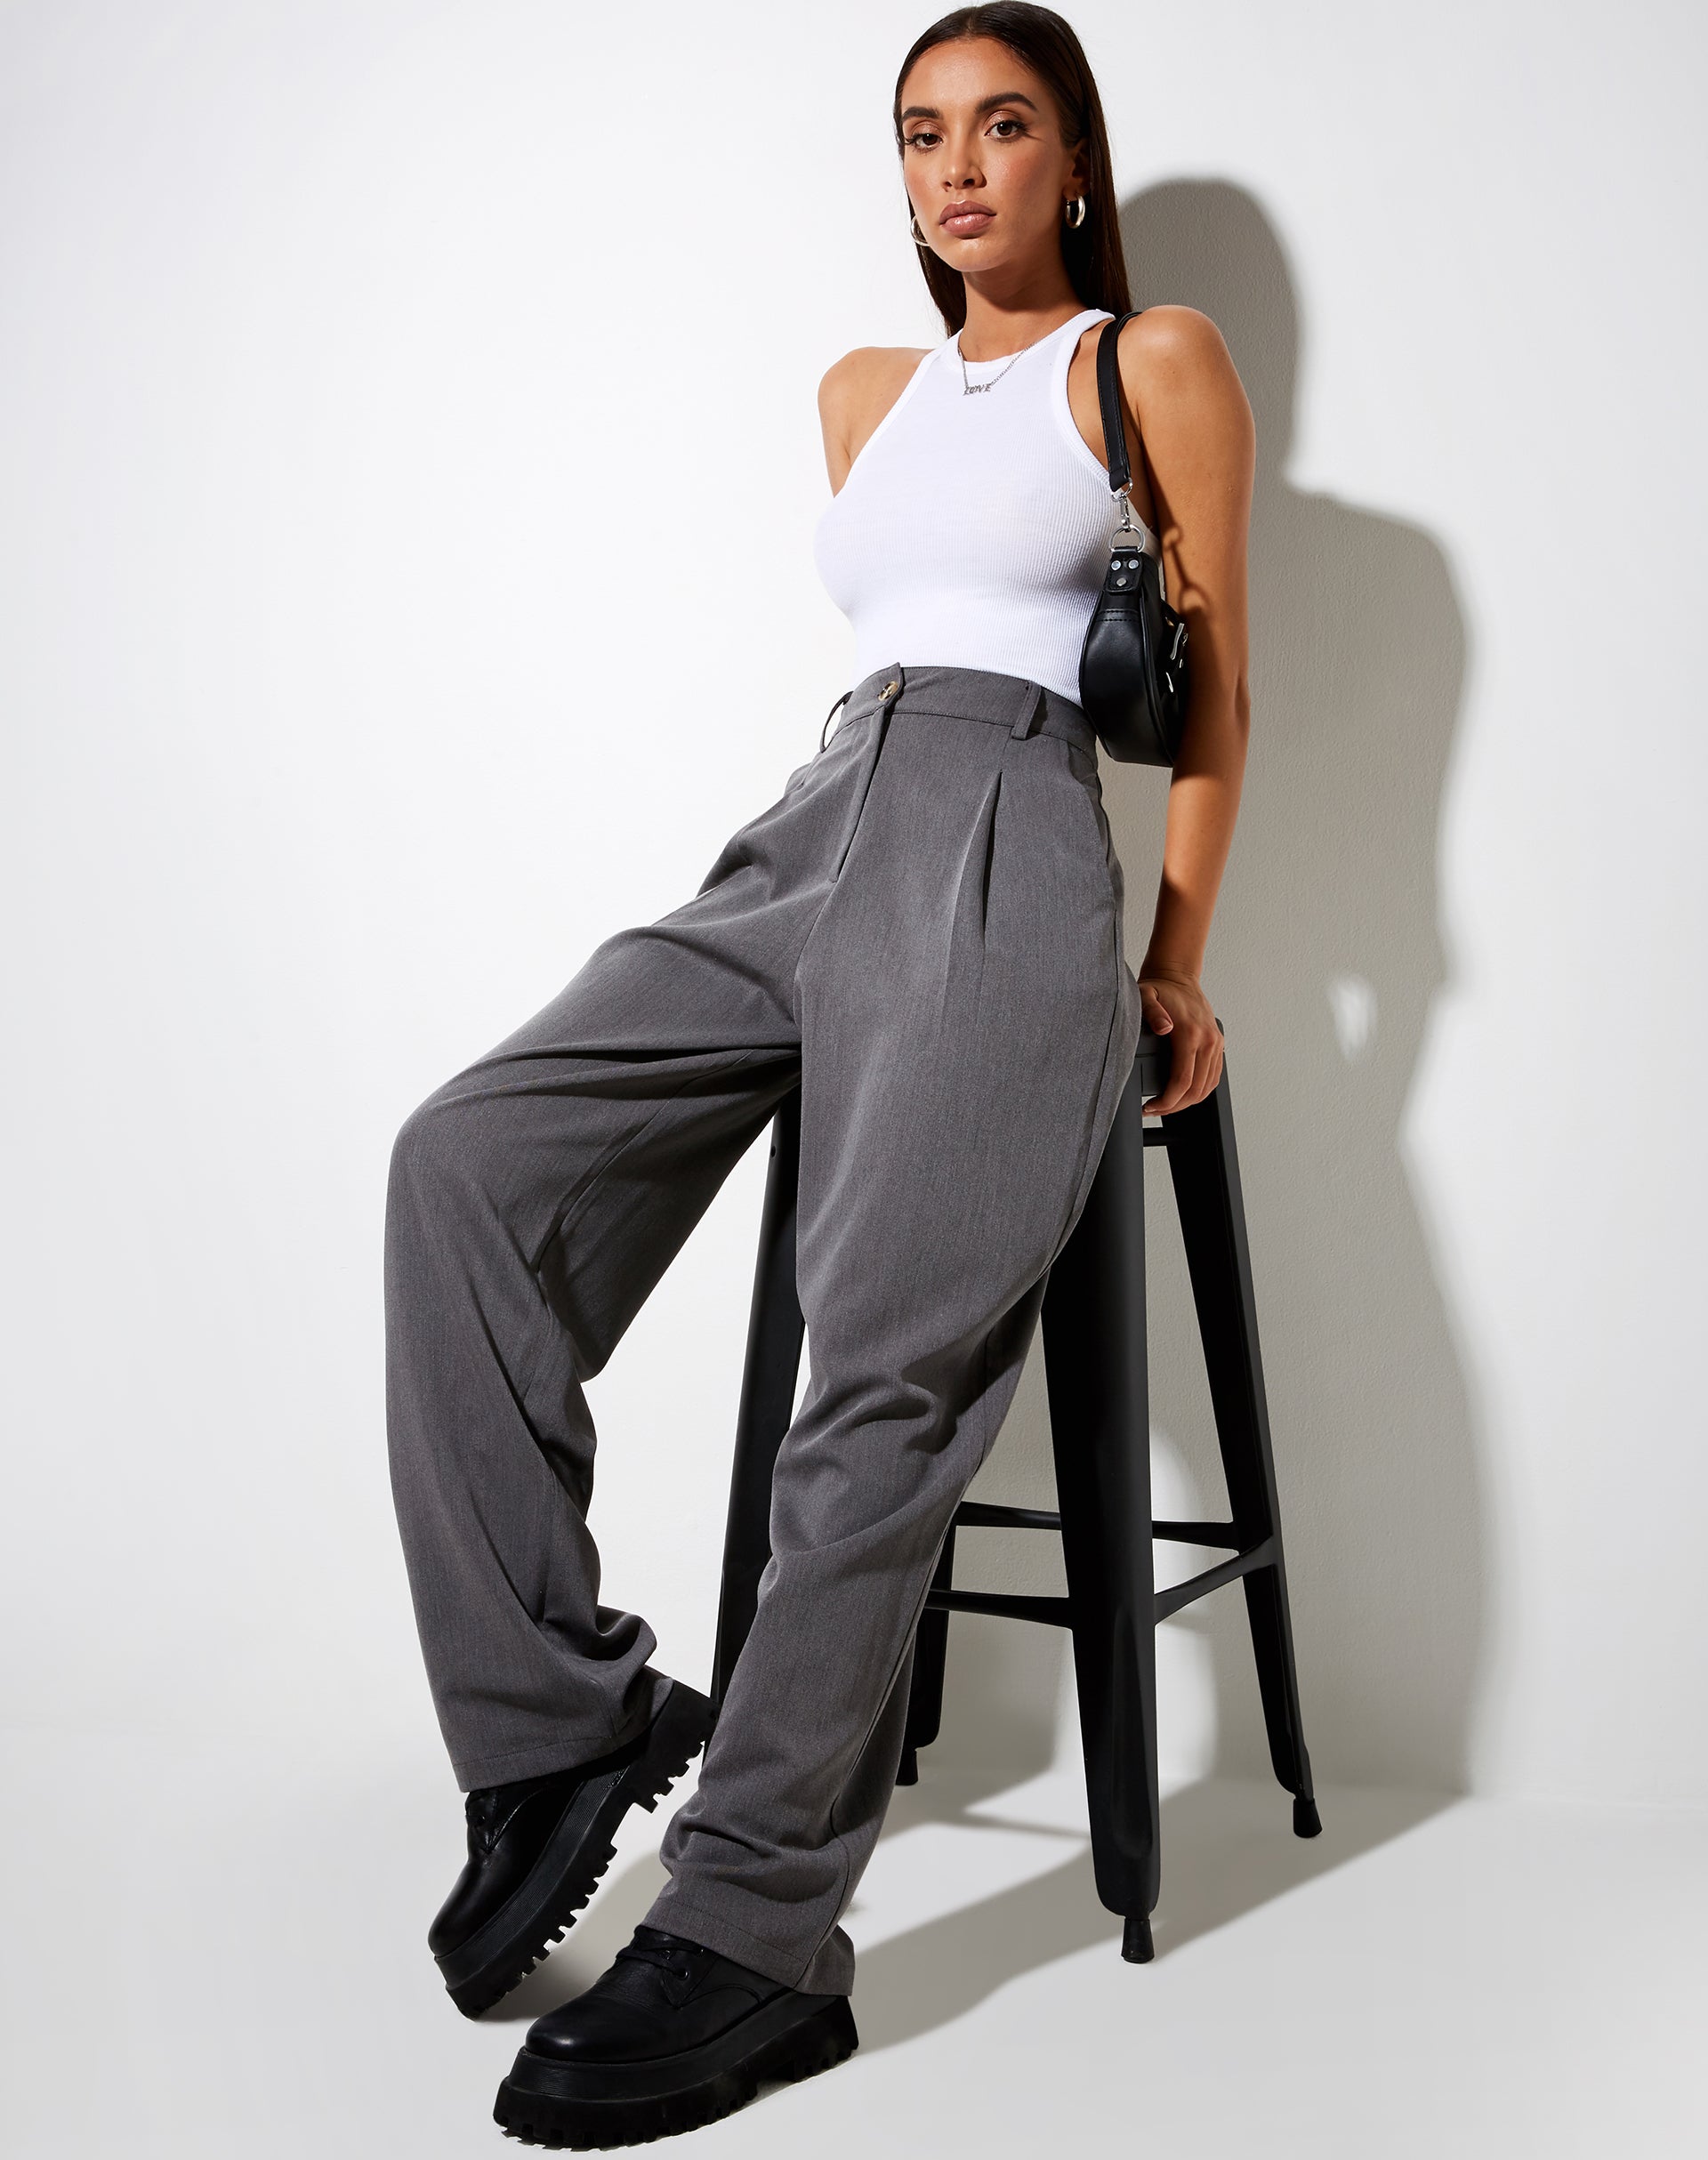 Image of Sakila Trouser in Tailoring Charcoal